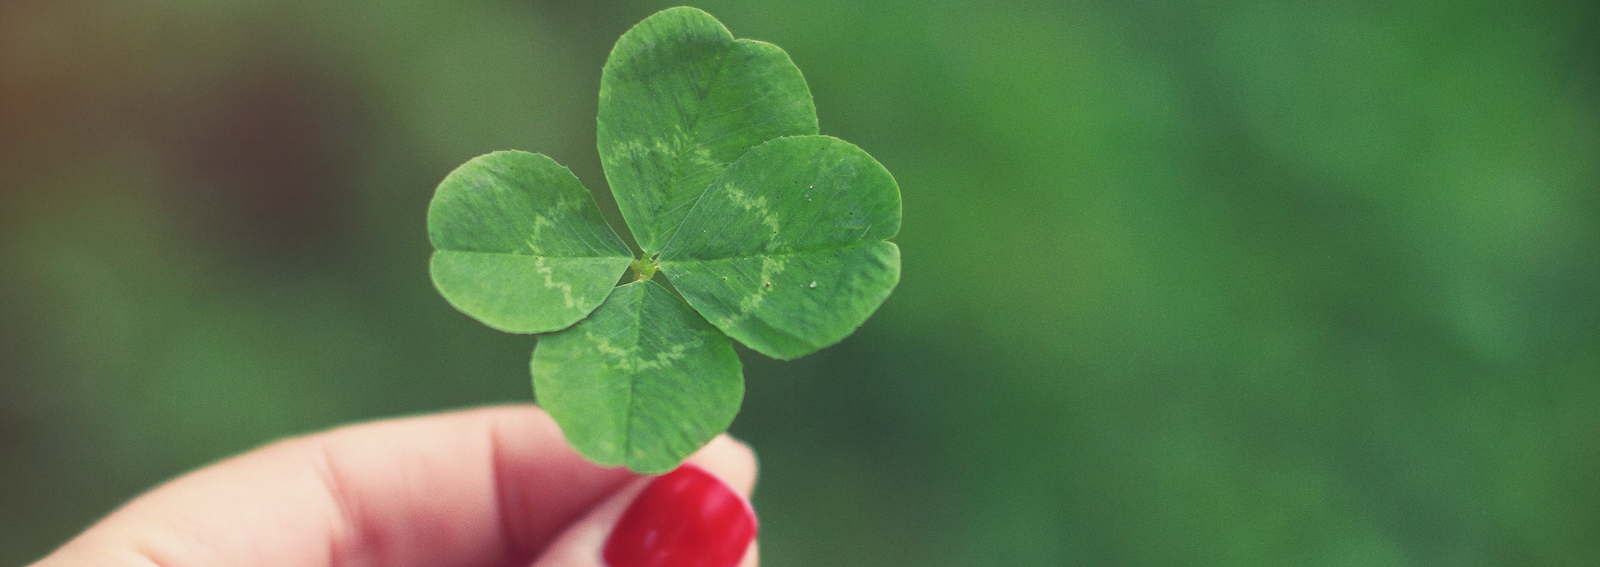 Woman's hand holding four leaf clover